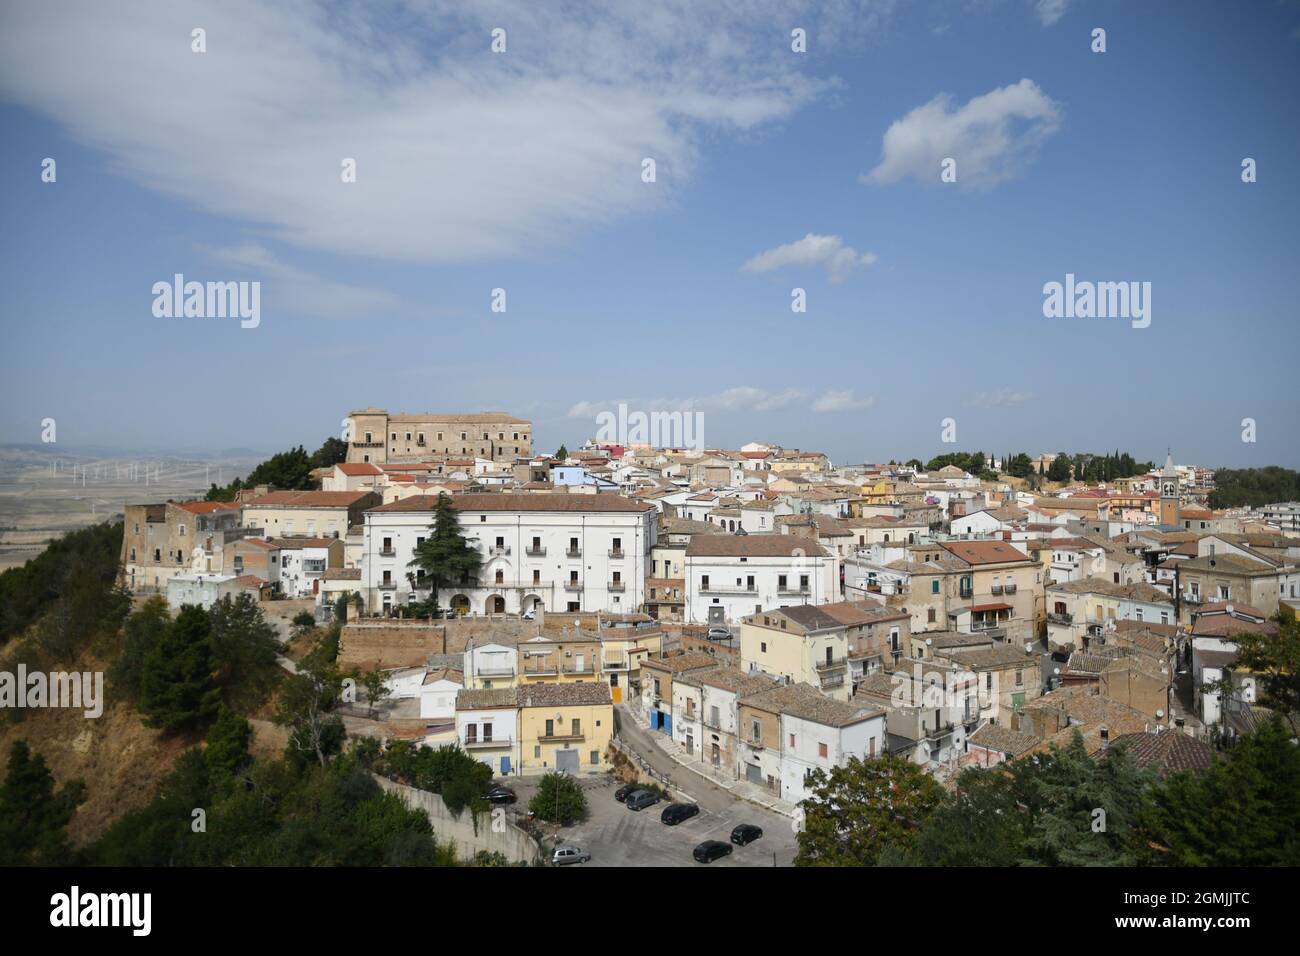 Panoramic view of Ascoli Satriano, an old town in the province of Foggia, Italy. Stock Photo